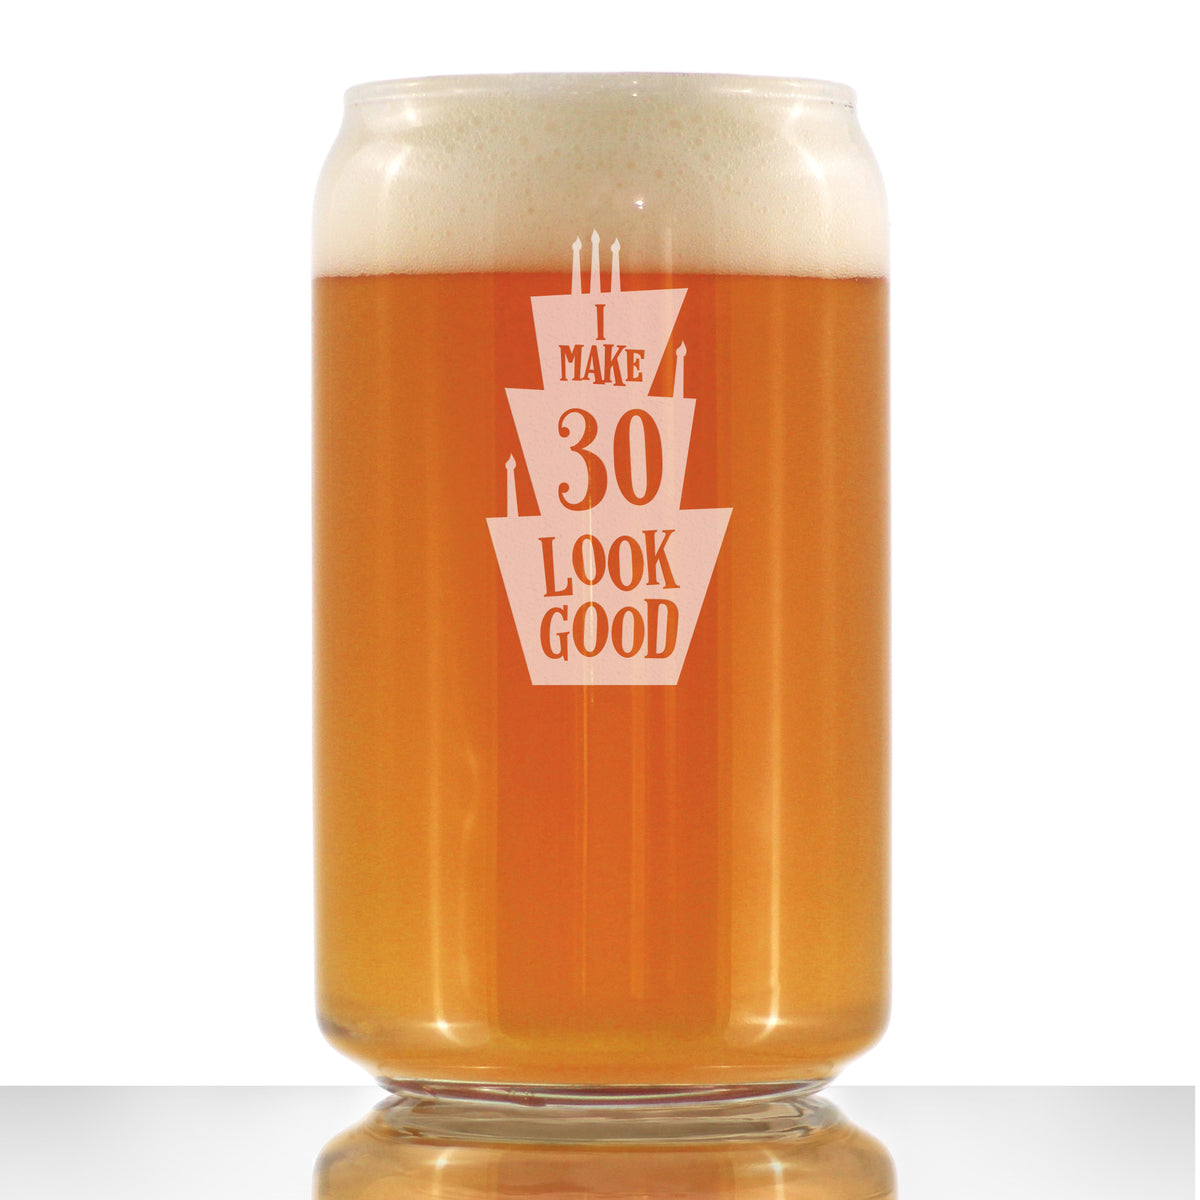 Make 30 Look Good - Funny 16 oz Beer Can Pint Glass - 30th Birthday Gifts for Men or Women Turning 30 - Bday Party Decor